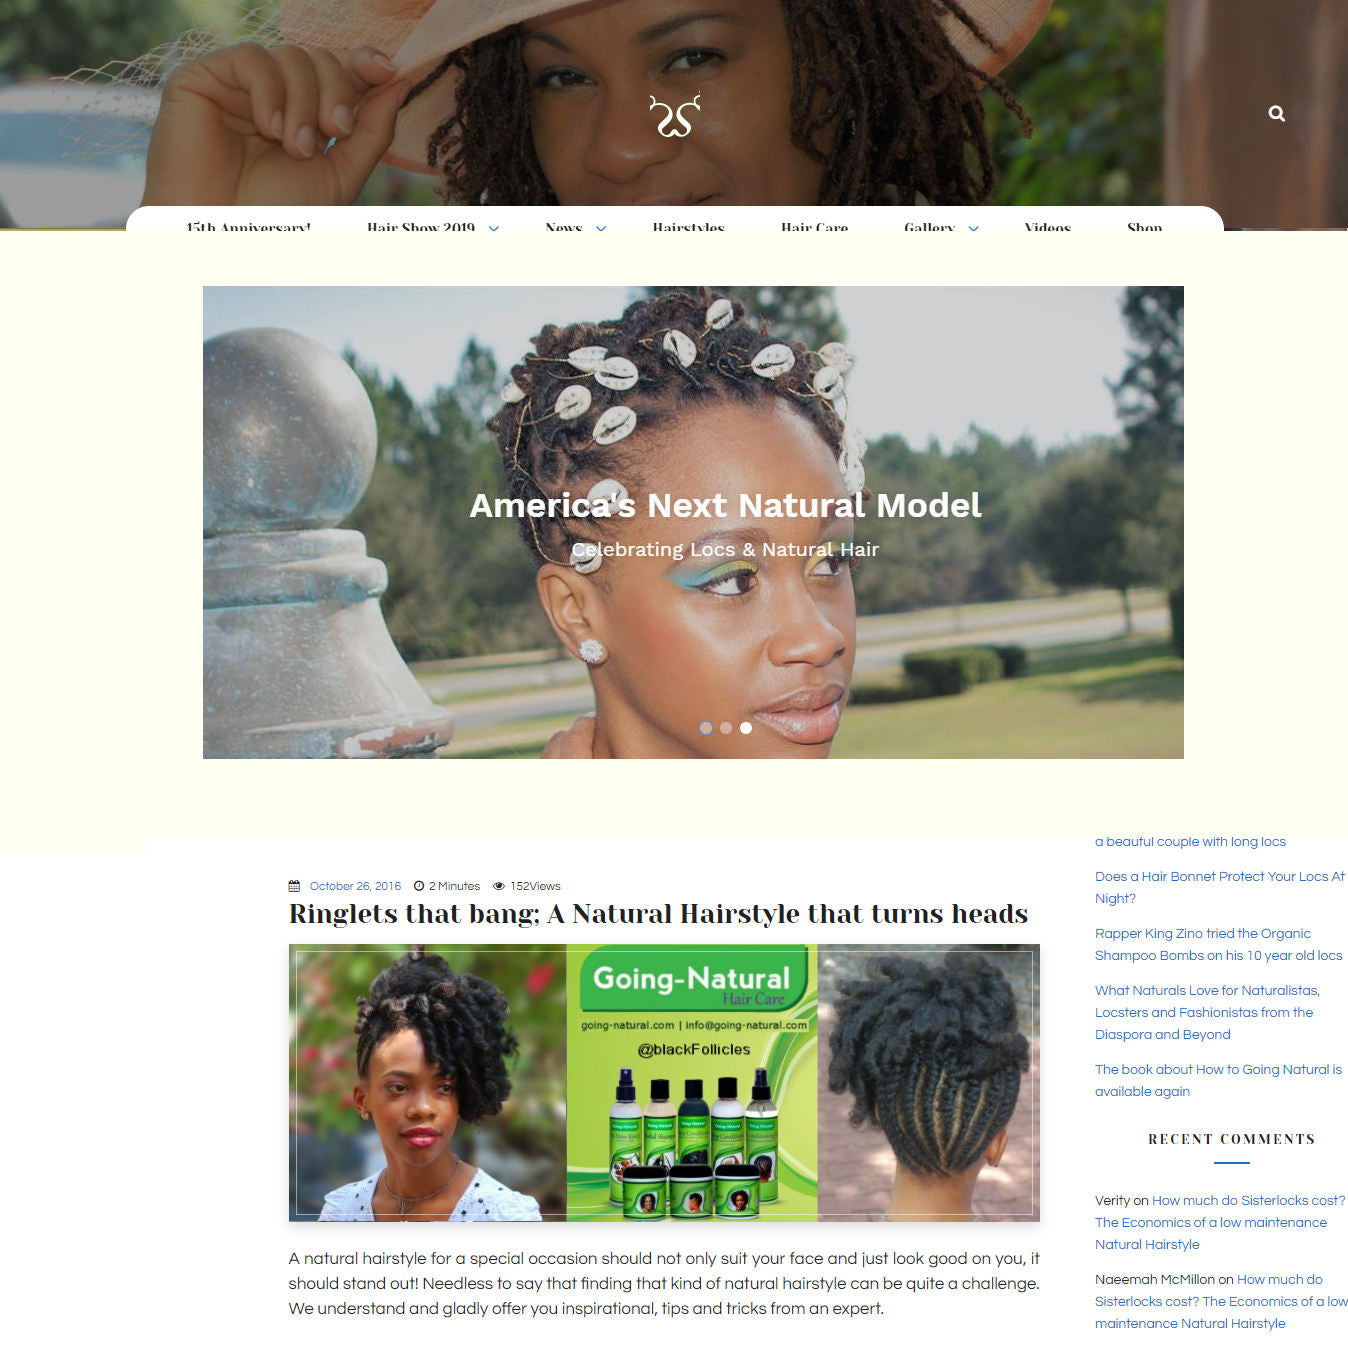 Before WhatNaturalsLove there was Going Natural; a look back